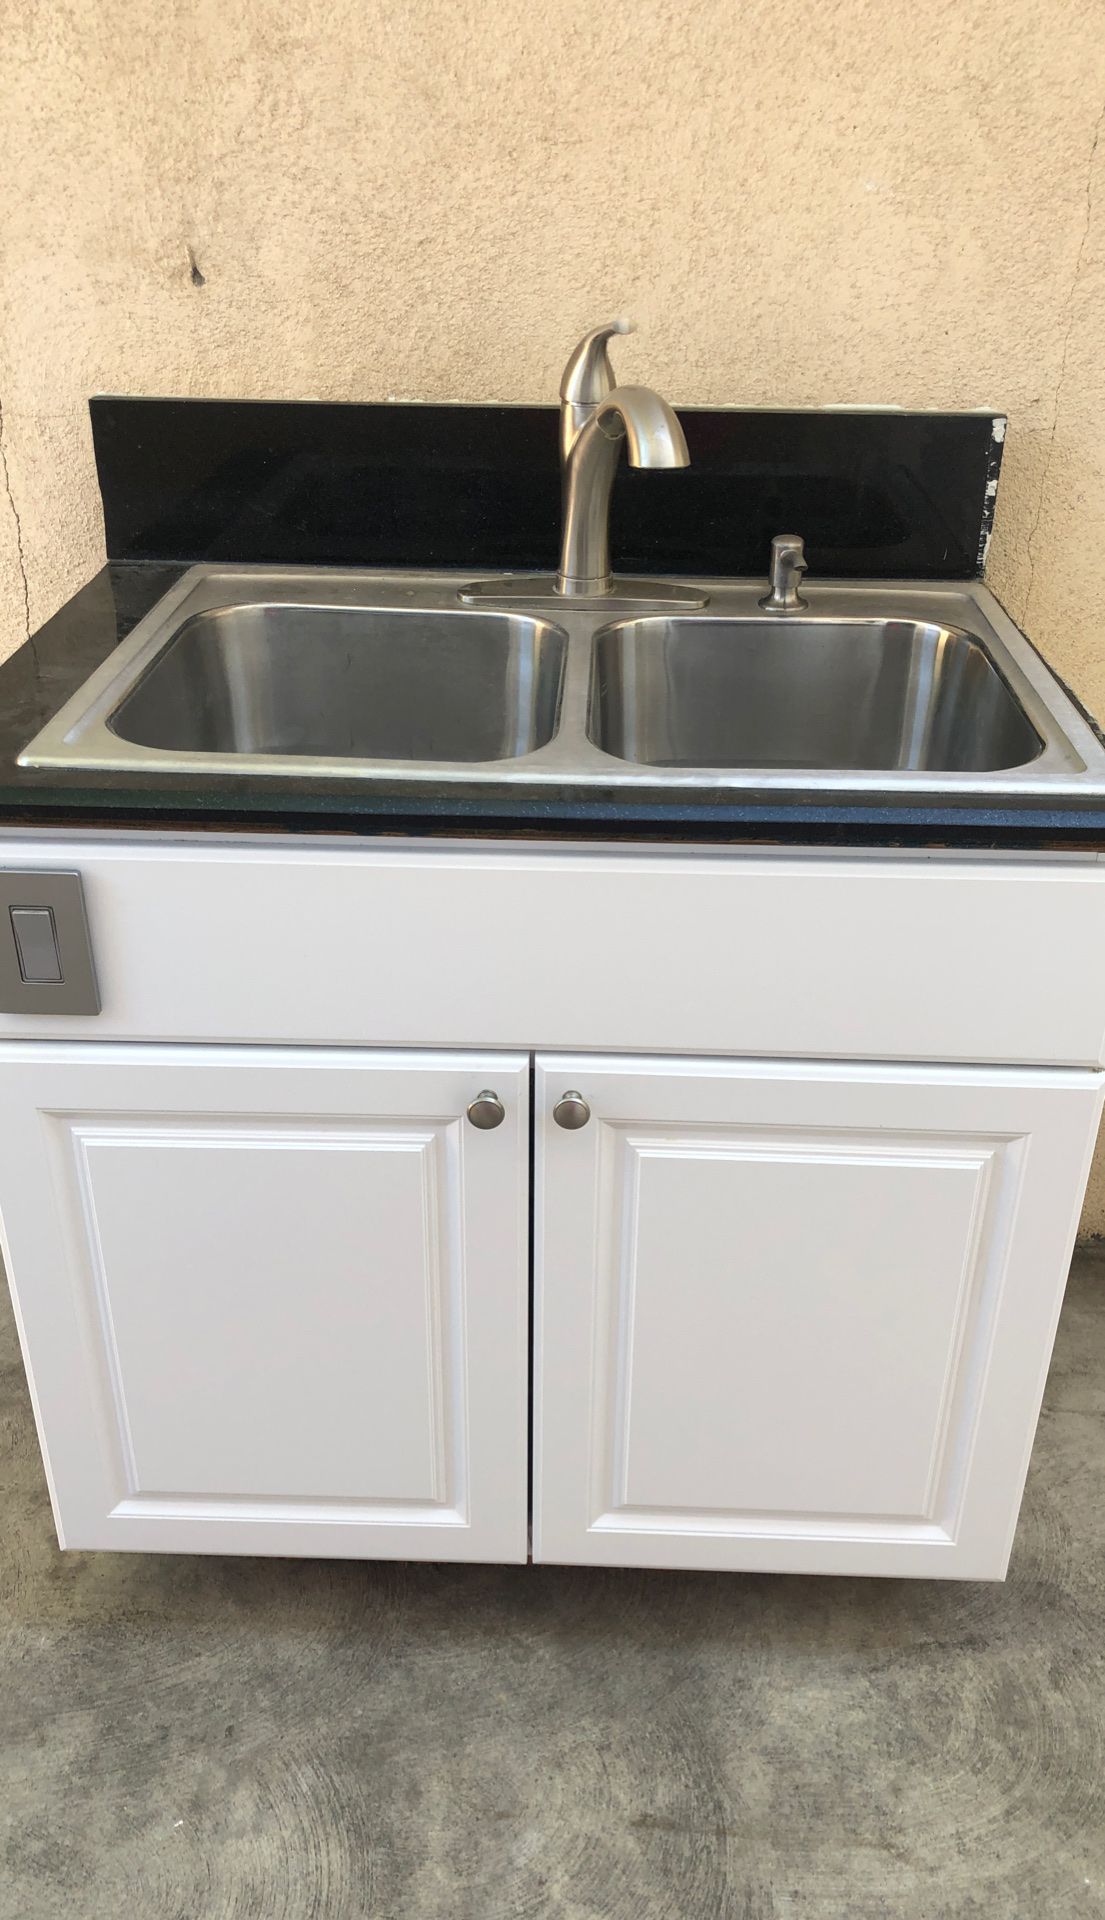 Kitchen cabinet with sink , faucet and food disposal 37” by 25”